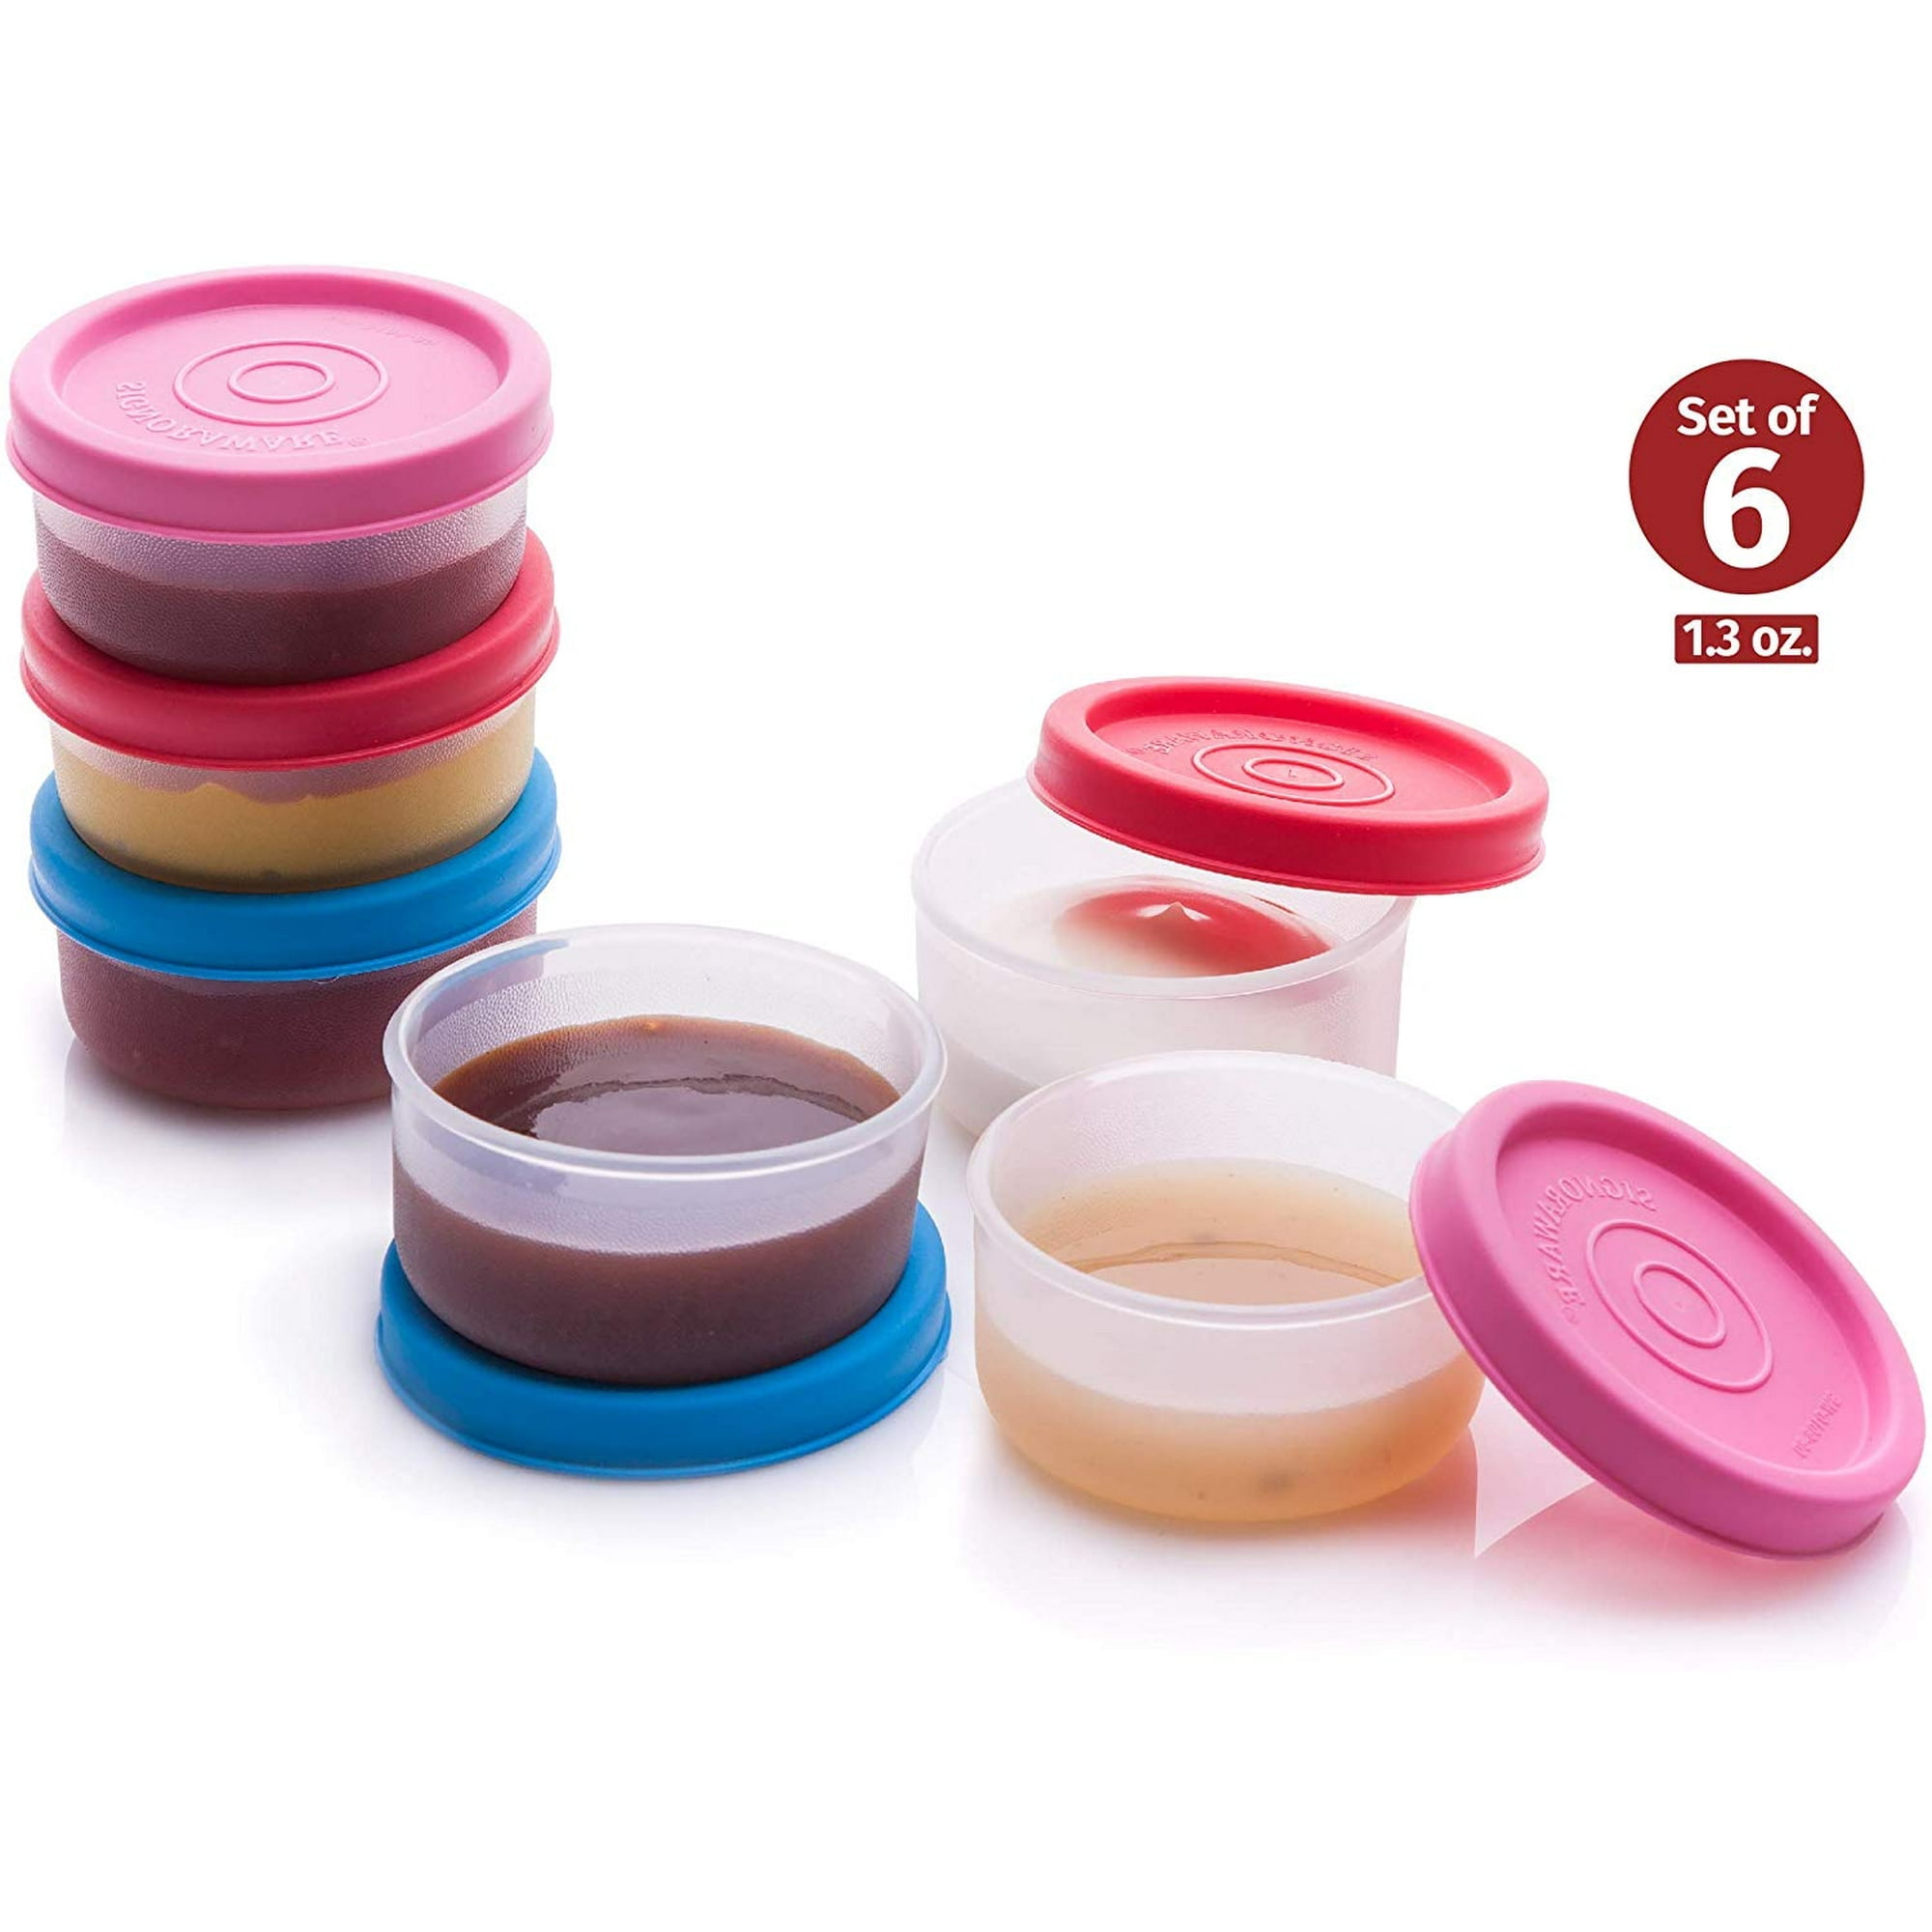 SET OF 9 -- 1 oz Small Plastic Containers Screw On Lids 1 7/8 inch